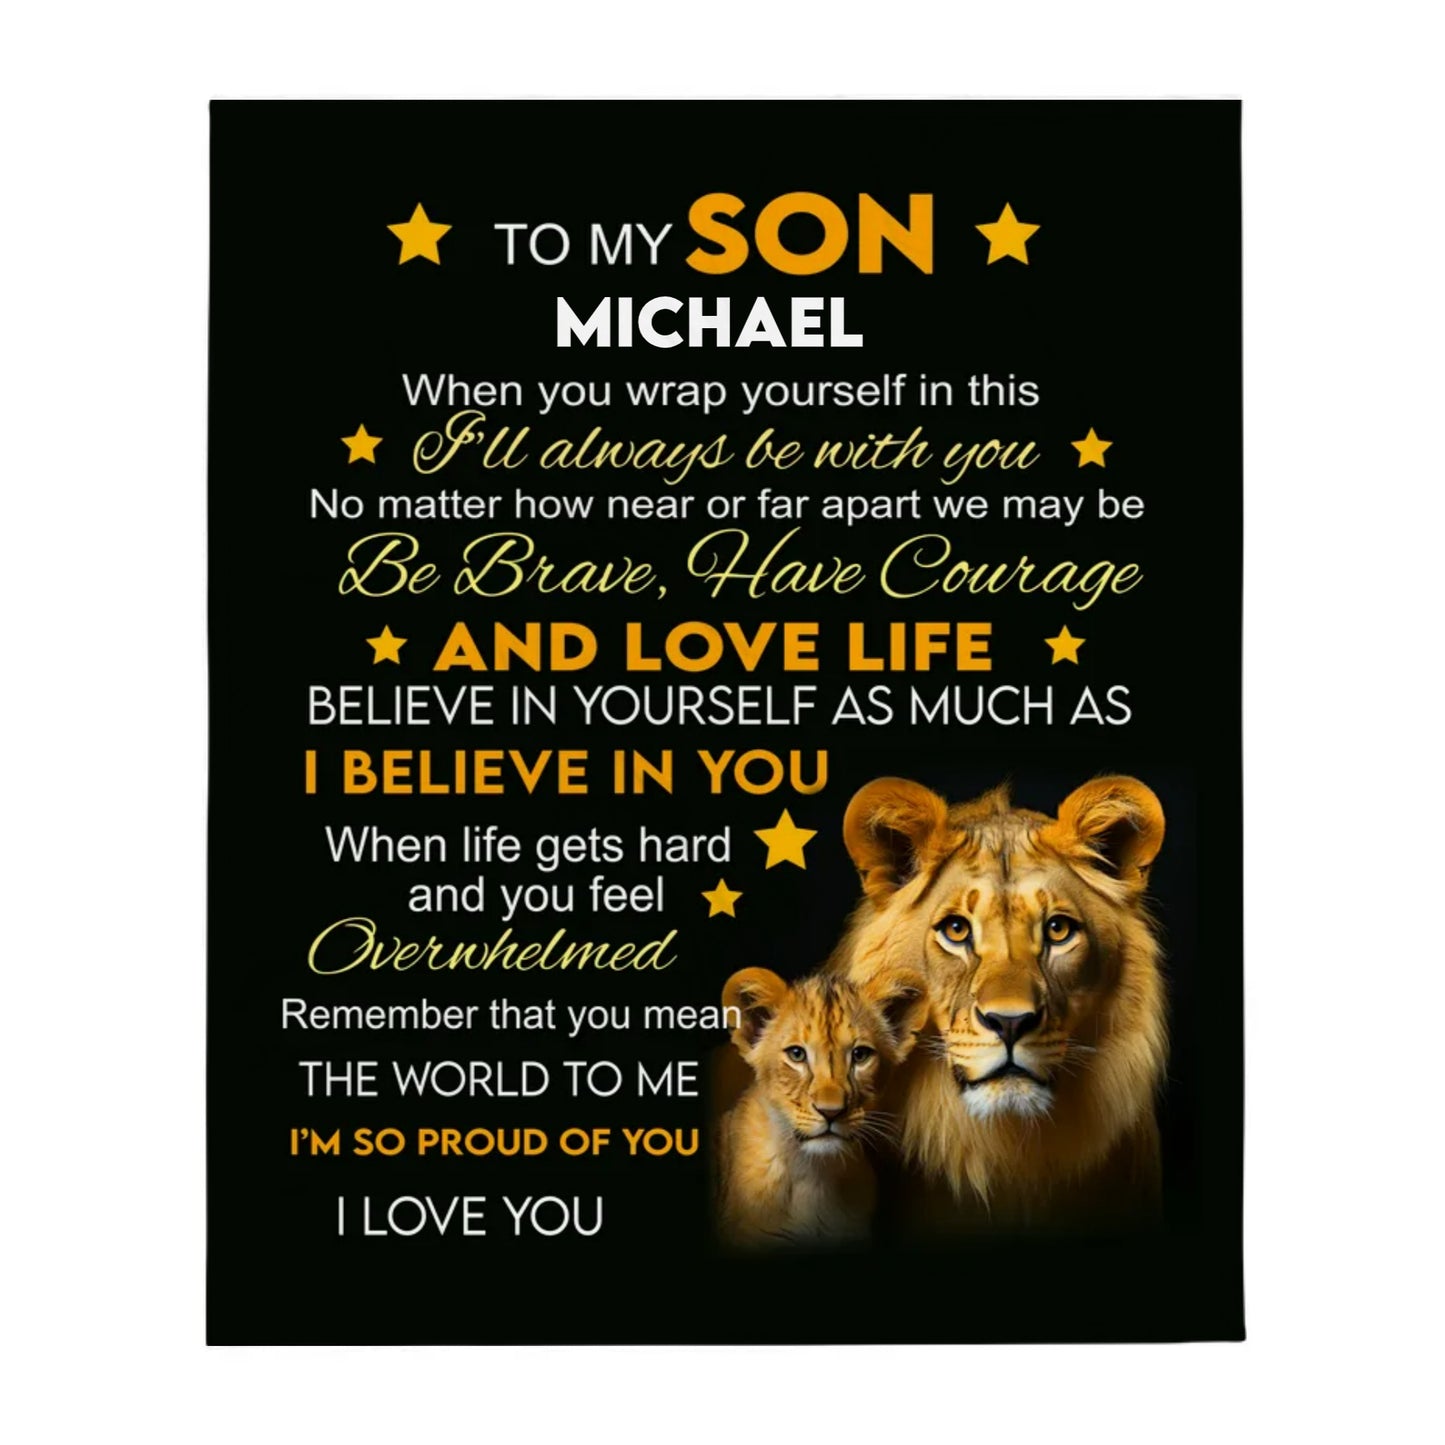 To My Son | Love Life |  Personalized Throw Blanket 50*60 v2